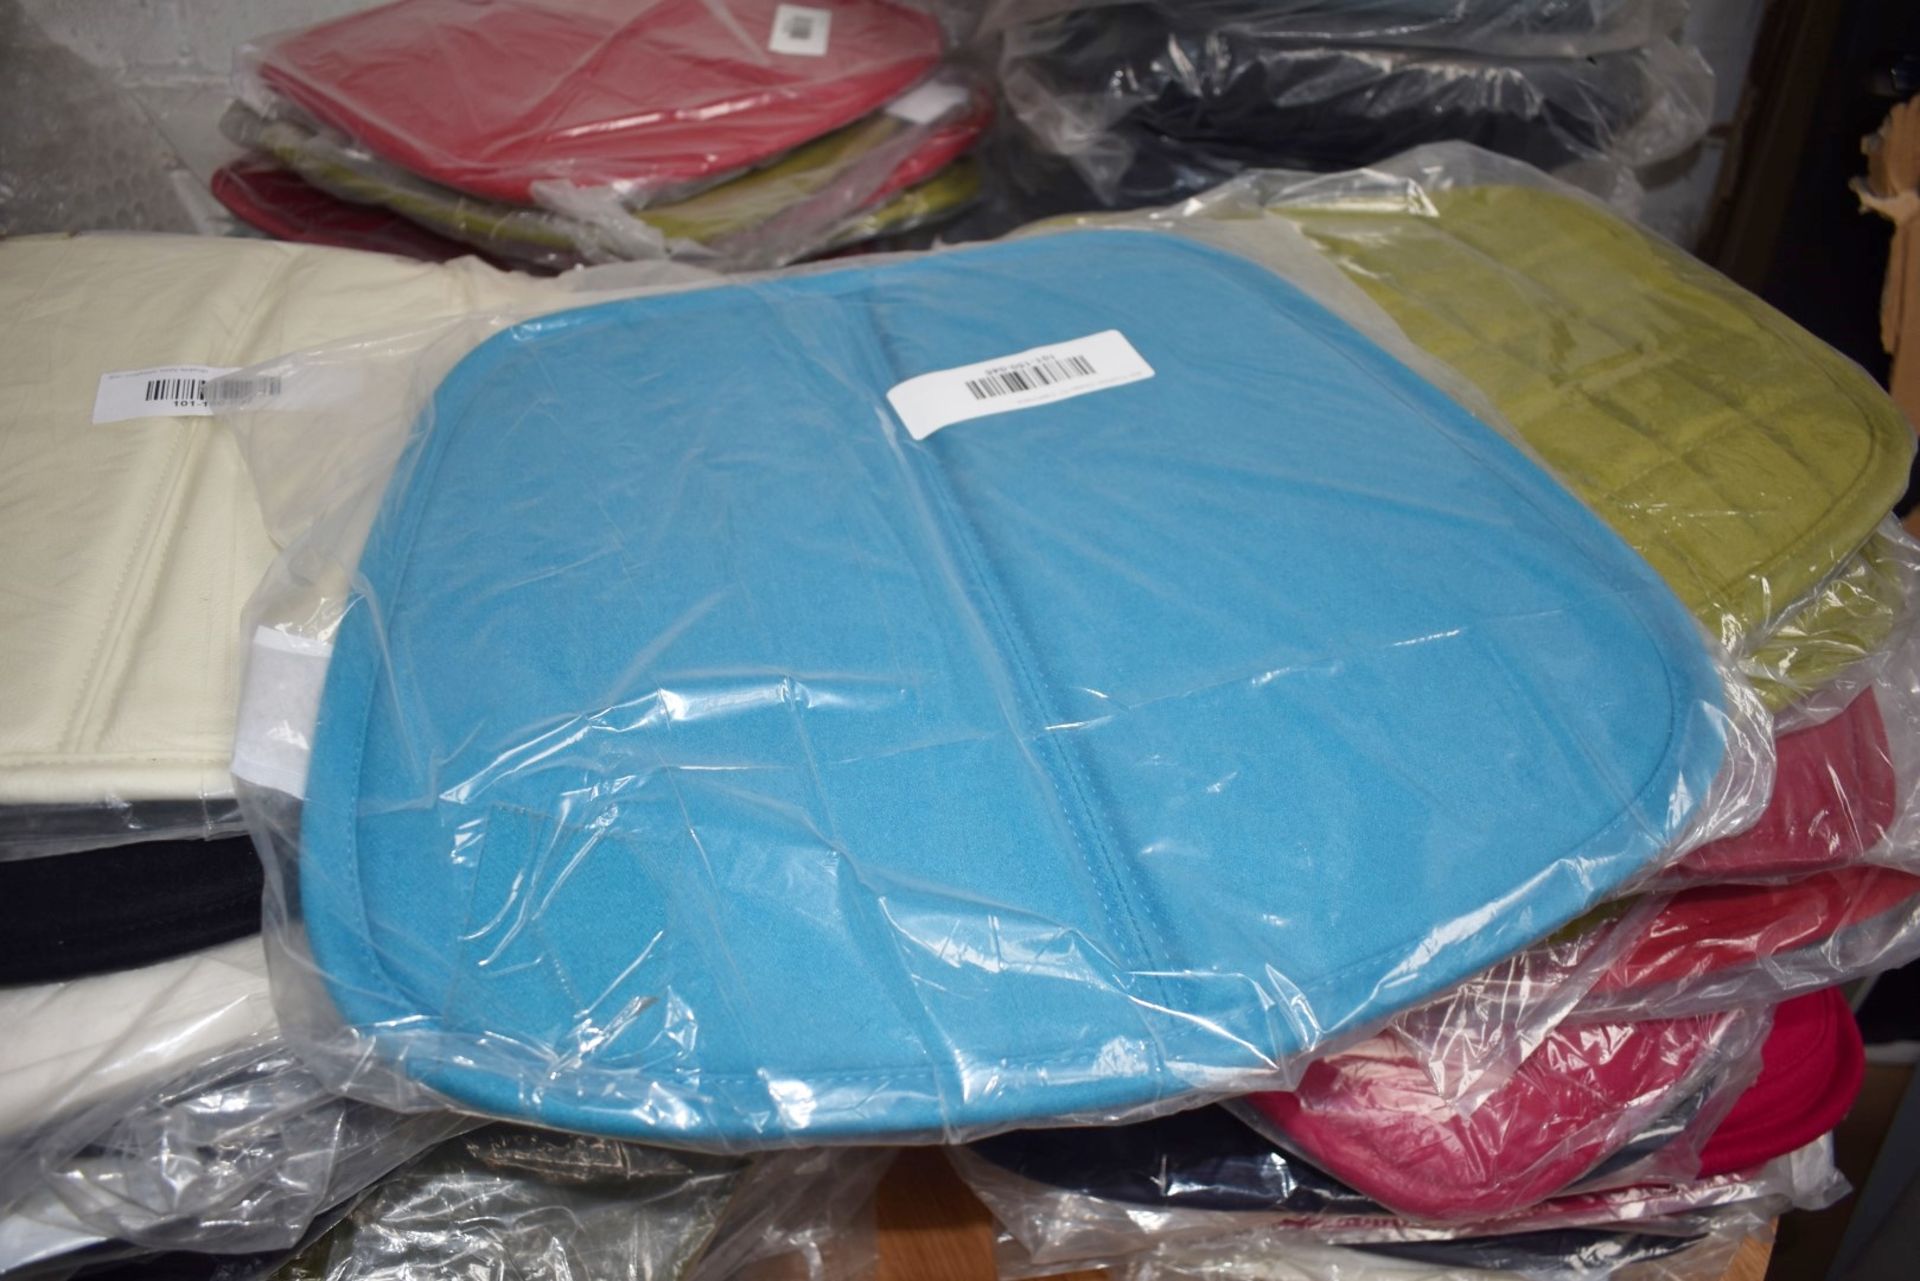 80 x Dining Chair / Outdoor Chair Seat Pads - Includes Many Cashmere Pads in Various Colours & More - Image 10 of 29